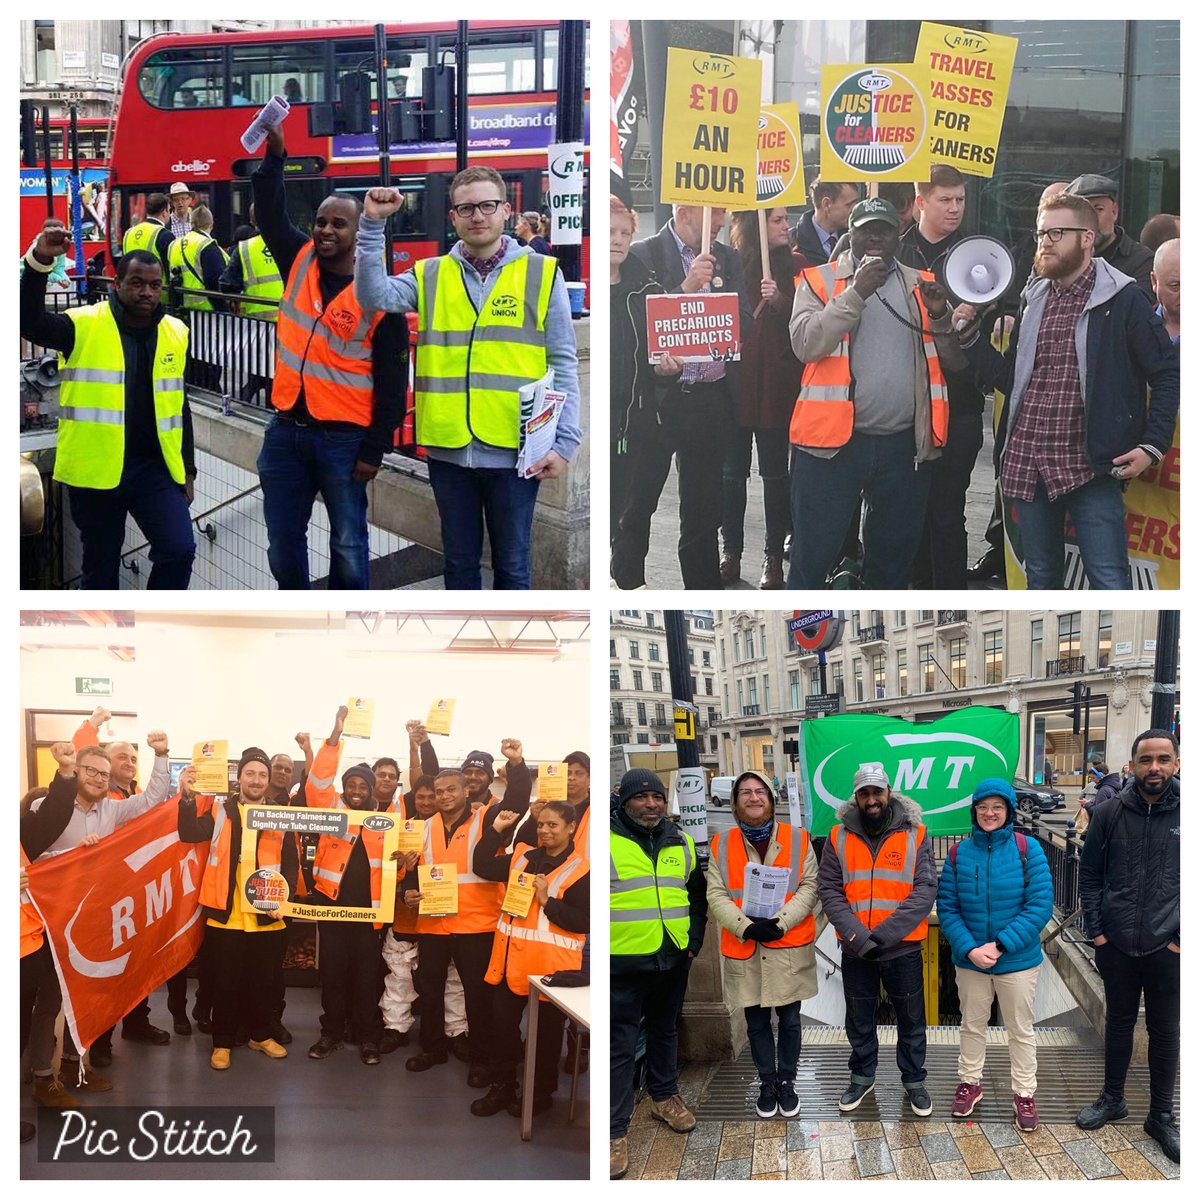 It’s my last week as an @RMTunion rep (for now!). I’m due to move to a new role in LU soon so didn’t re-stand. It’s been an honour to represent my workmates; I hope I’ve done some good. Looking forward to continuing to fight the fight in a new job! @bakerloormt @RMTLondon